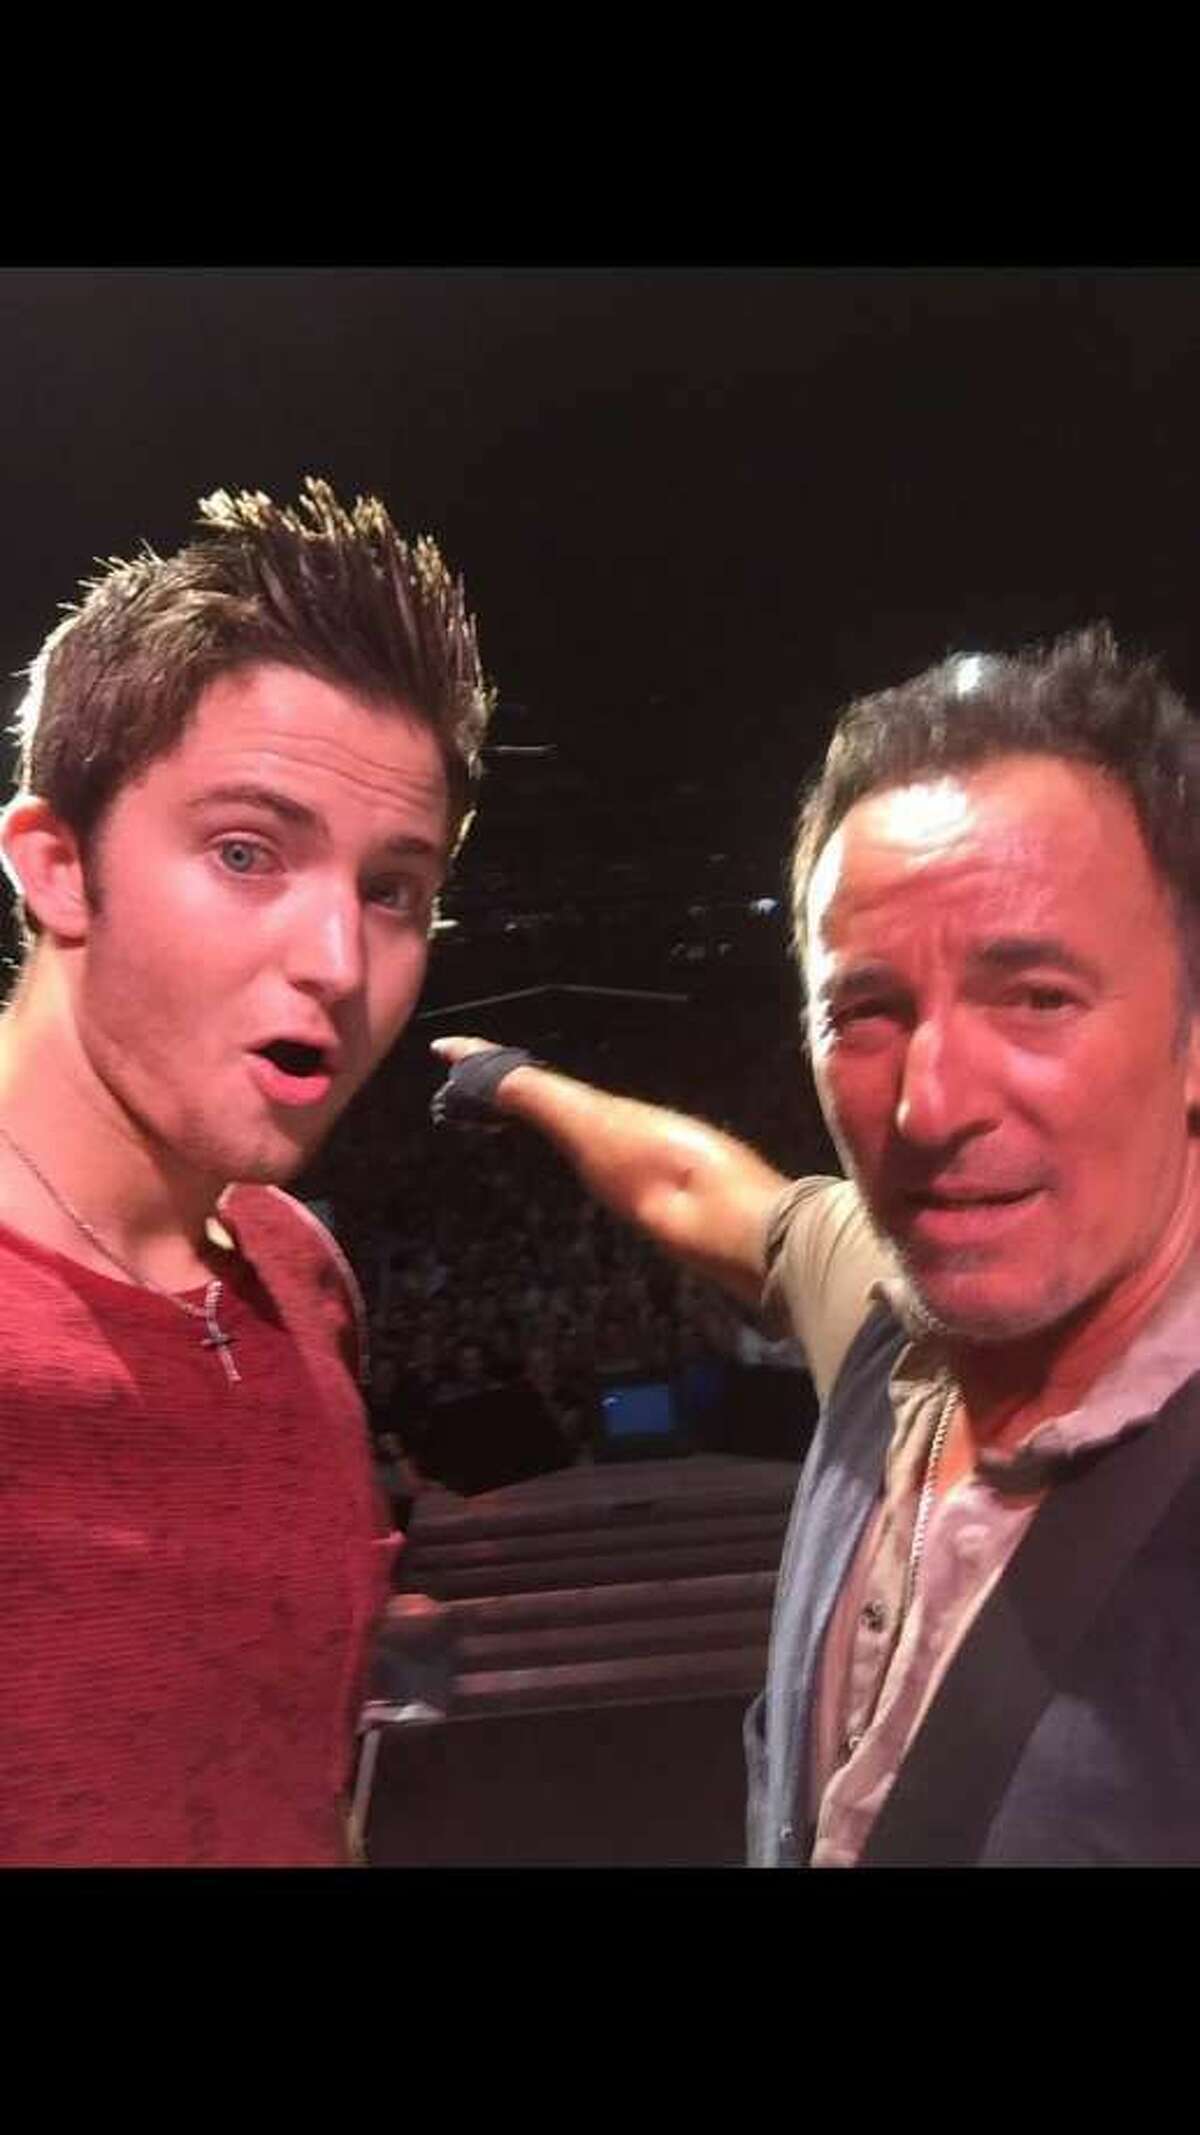   Bruce Springsteen invited Matthew Aucoin, a Texas A&M student, on stage to sing a duet after noticing the poster he was holding on Sept. 9,  2016 in Philadelphia. 